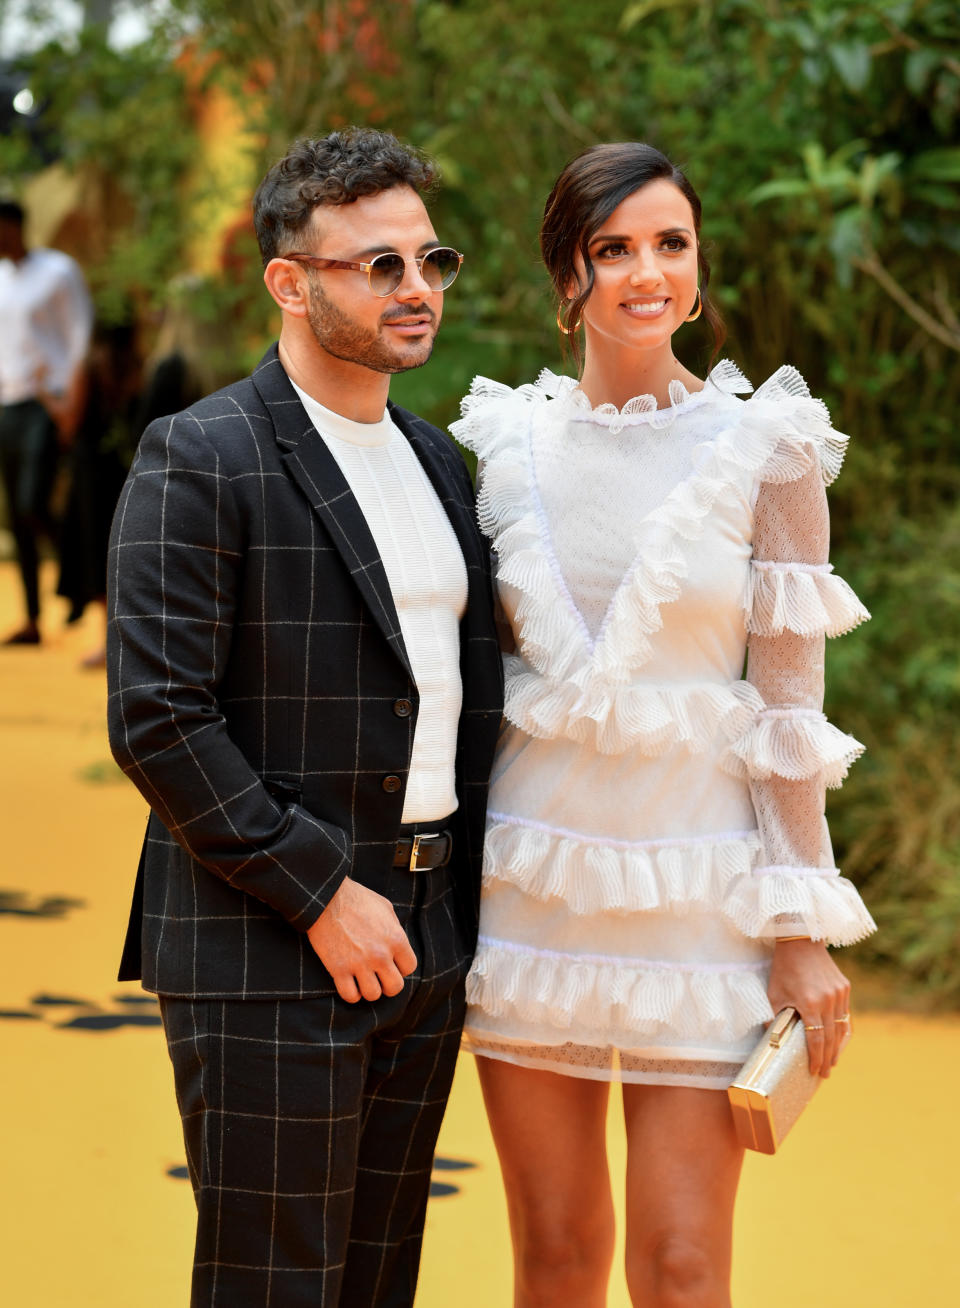 LONDON, ENGLAND - JULY 14:  Ryan Thomas and Lucy Mecklenburgh attend the European Premiere of Disney's "The Lion King" at Odeon Luxe Leicester Square on July 14, 2019 in London, England. (Photo by Gareth Cattermole/Getty Images for Disney)